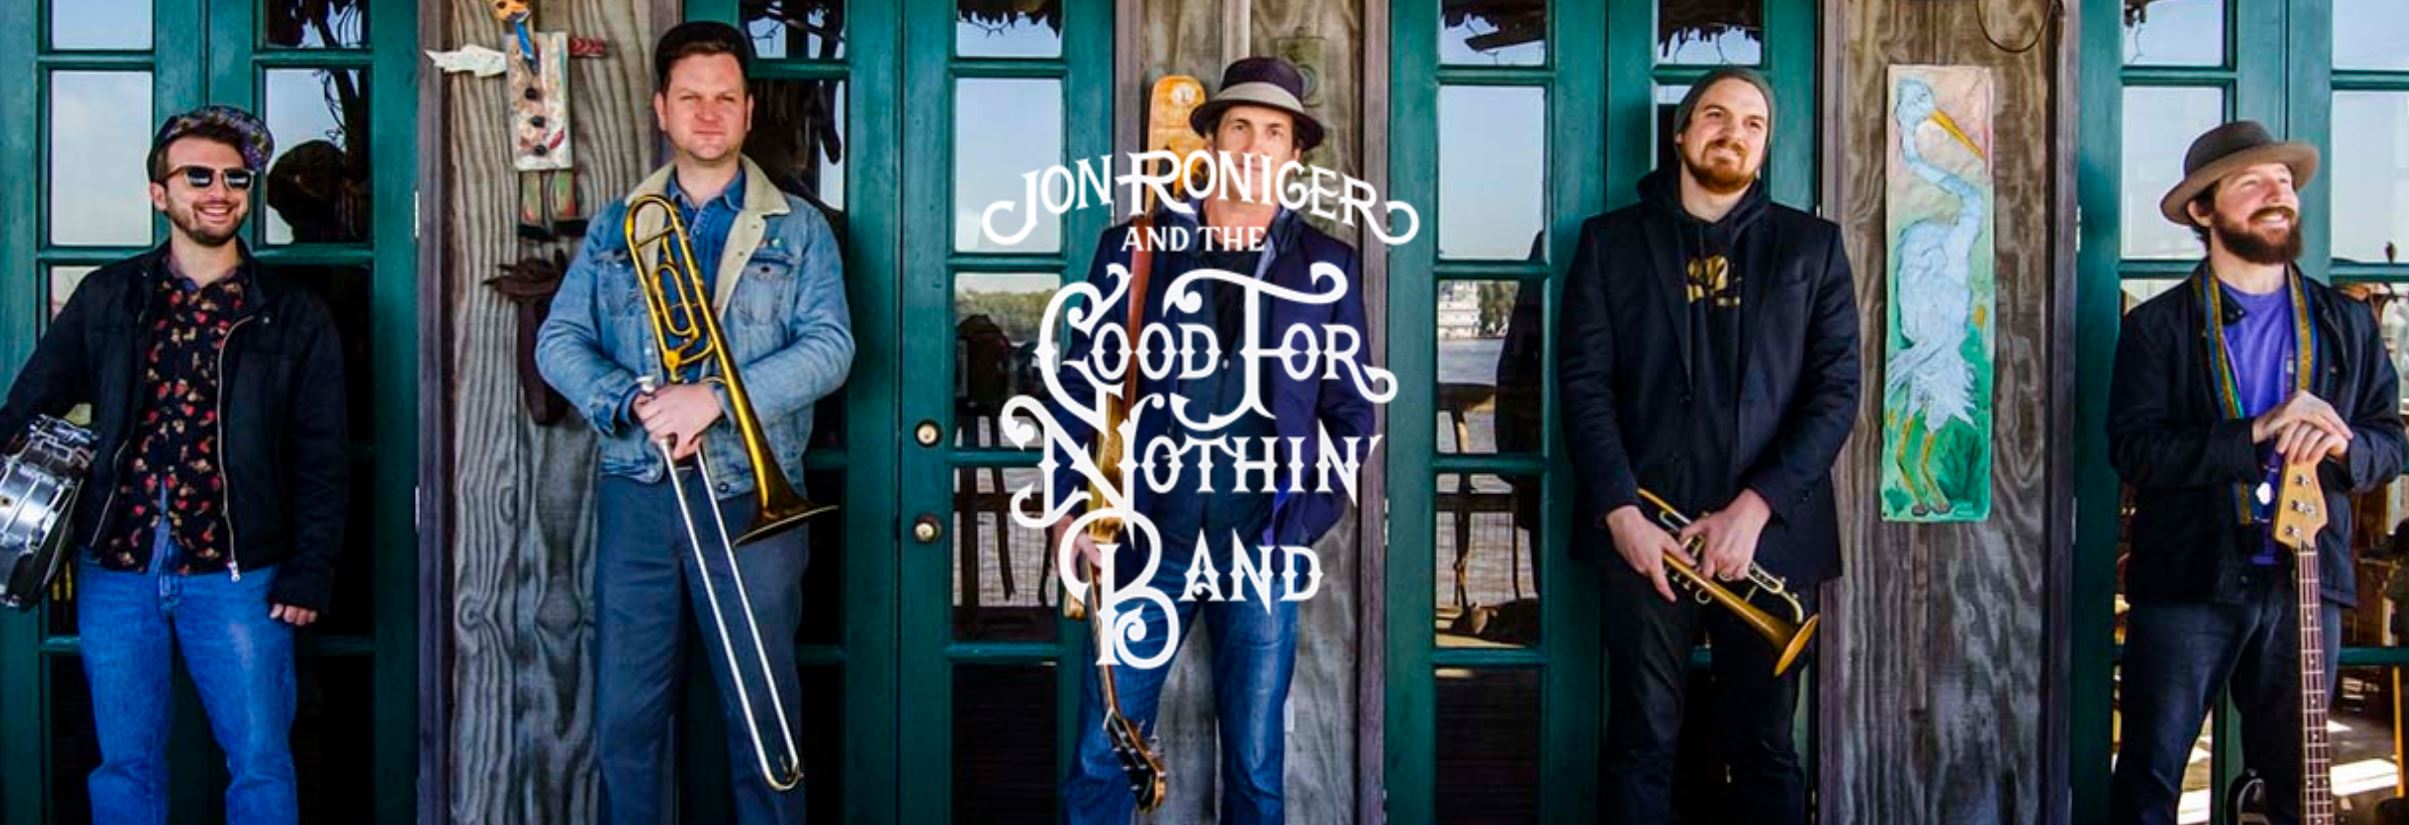 JON RONIGER & THE GOOD FOR NOTHIN' BAND (USA, New Orleans)